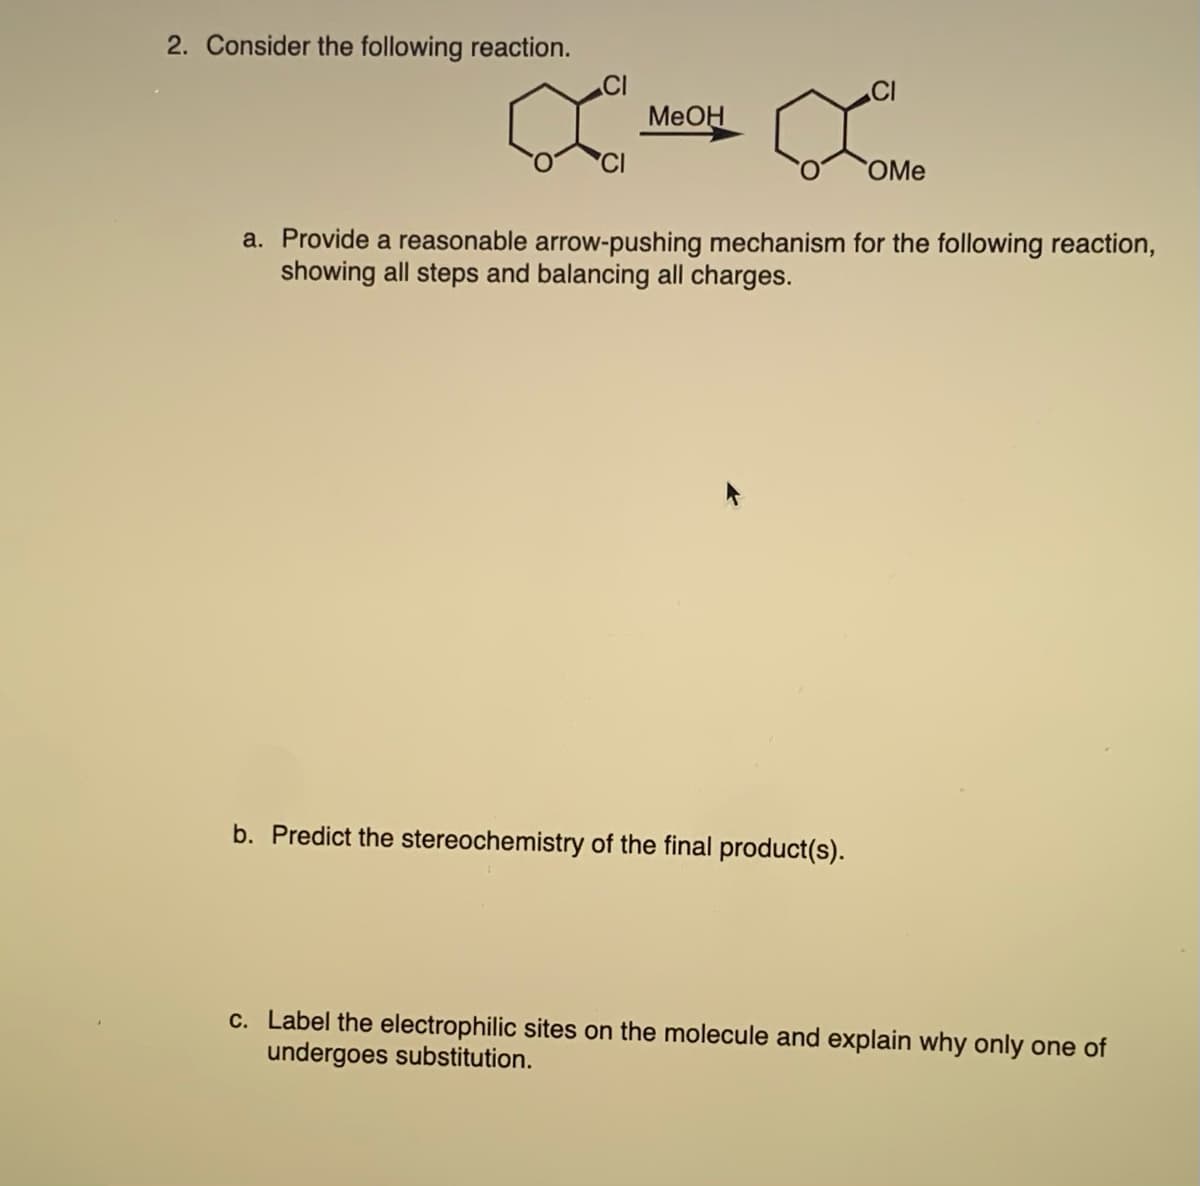 2. Consider the following reaction.
MeOH
CI
b. Predict the stereochemistry of the final product(s).
OMe
a. Provide a reasonable arrow-pushing mechanism for the following reaction,
showing all steps and balancing all charges.
c. Label the electrophilic sites on the molecule and explain why only one of
undergoes substitution.